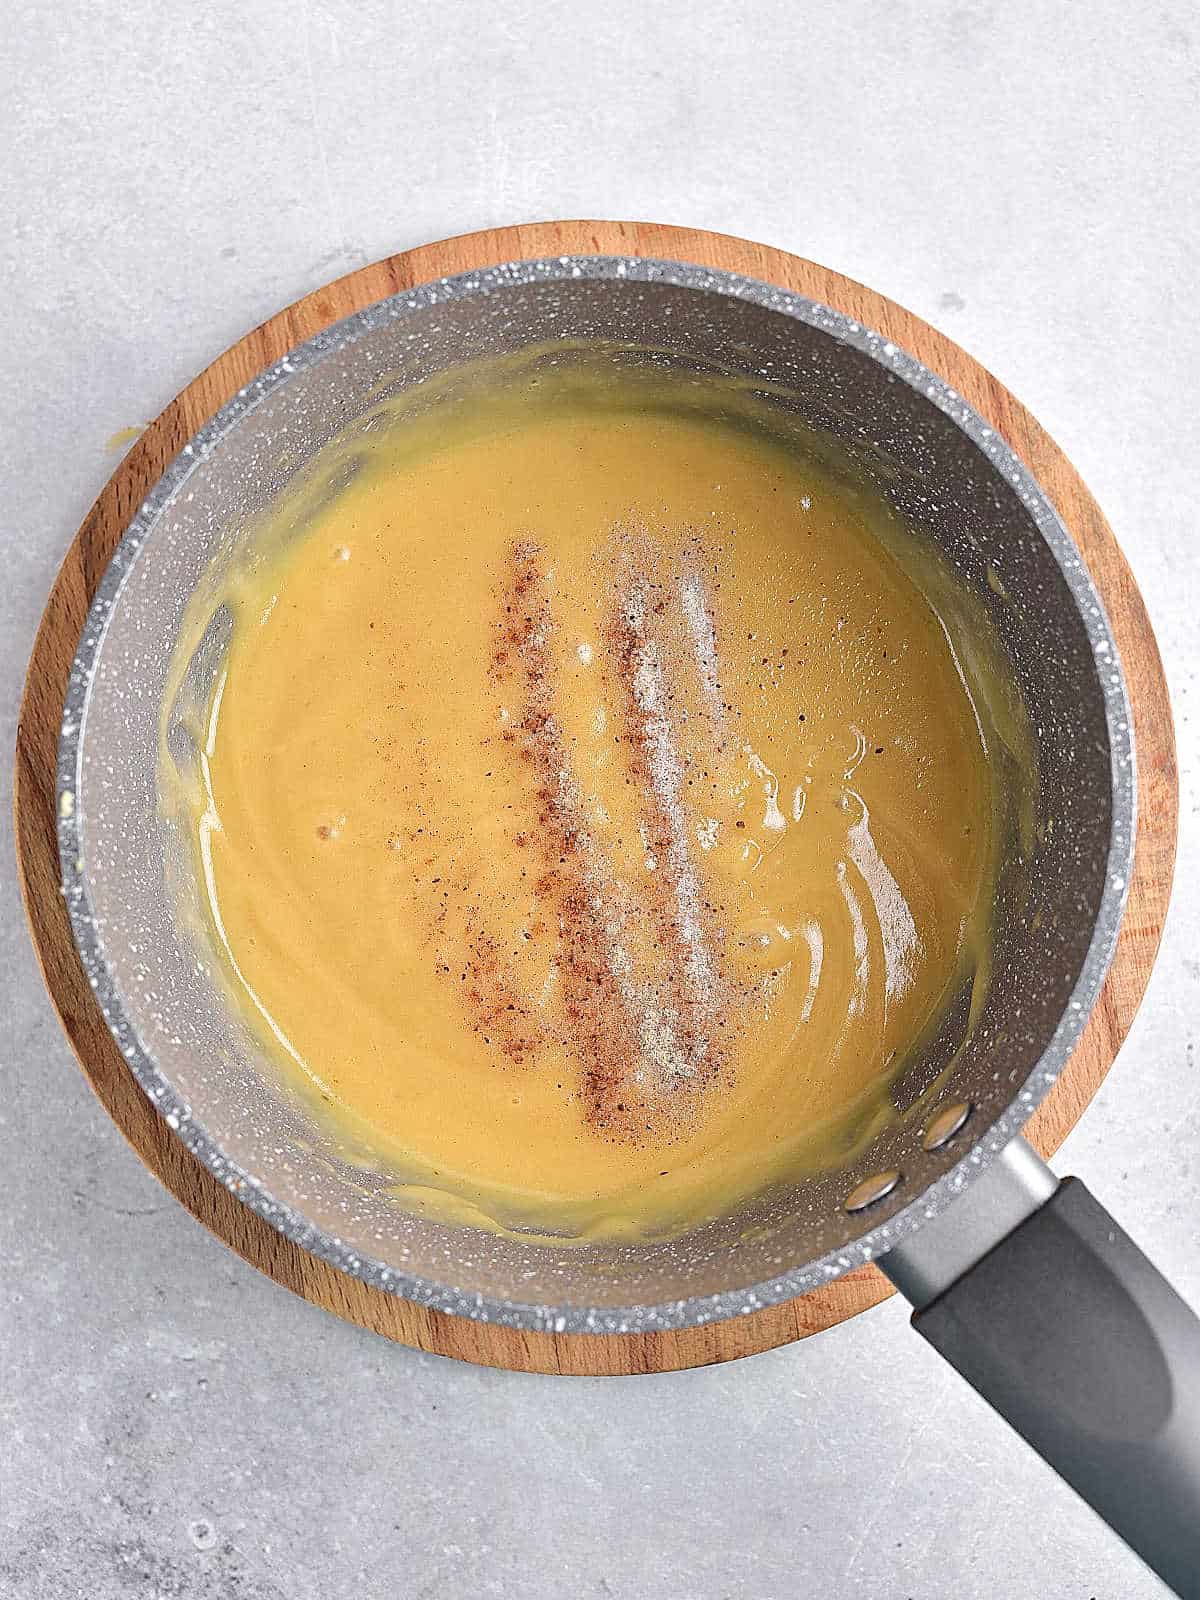 Light gray surface with saucepan containing gravy sprikled with spices.